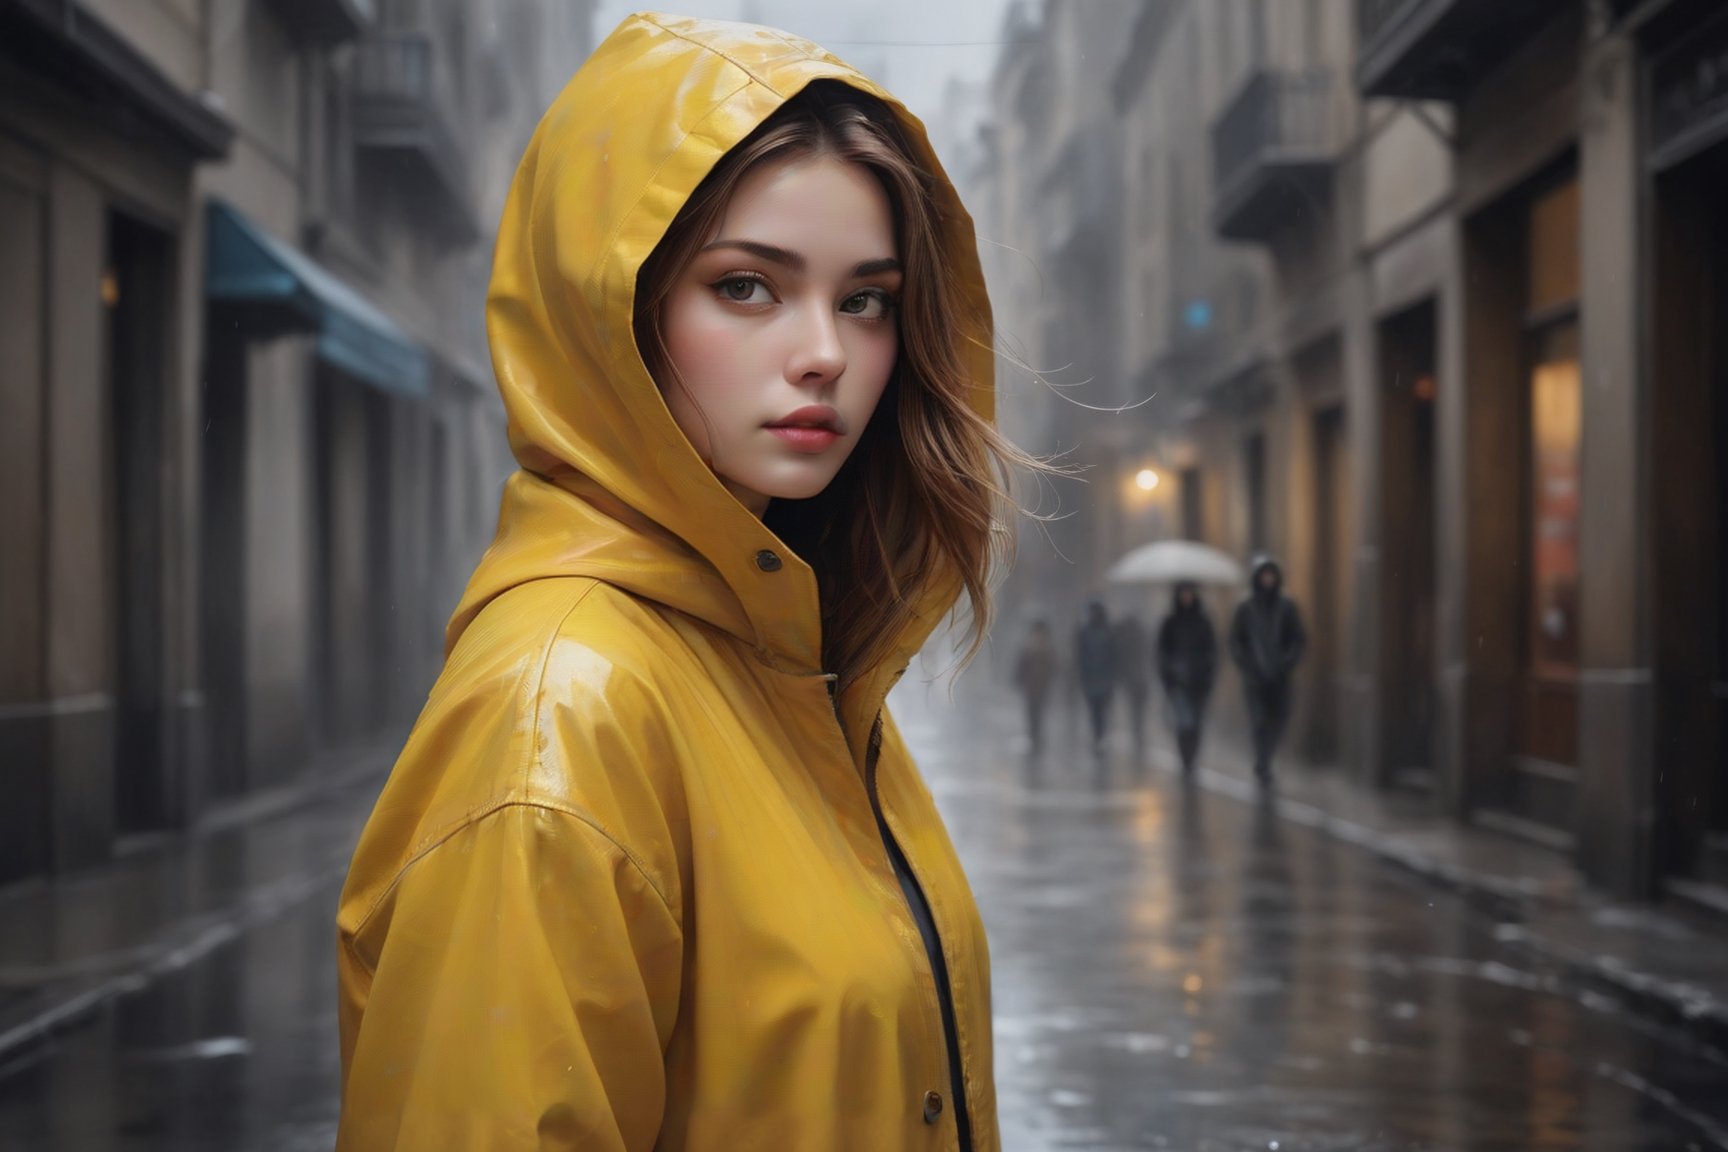 Generate an artisvic vision of watercolor portrait of a beautiful girl in a yellow raincoat,20yo,walking in a dark raining street.fullbody.graffiti style.(Rough strokes).Mystical.Mysterious.Ethereal.Dim lights in the street.Dark and Hazy background.puddles.rain.fog. spotlight on her face.low key.(chiaroscuro lighting),blurry backdrop.BREAK rule of thirds,depth of perspective,perfect composition,impressionism,clear facial features,perfect hands,aesthetic minimalism,painterly,by Karol Bak,Alessandro Pautasso and Hayao Miyazaki, real_booster, art_booster